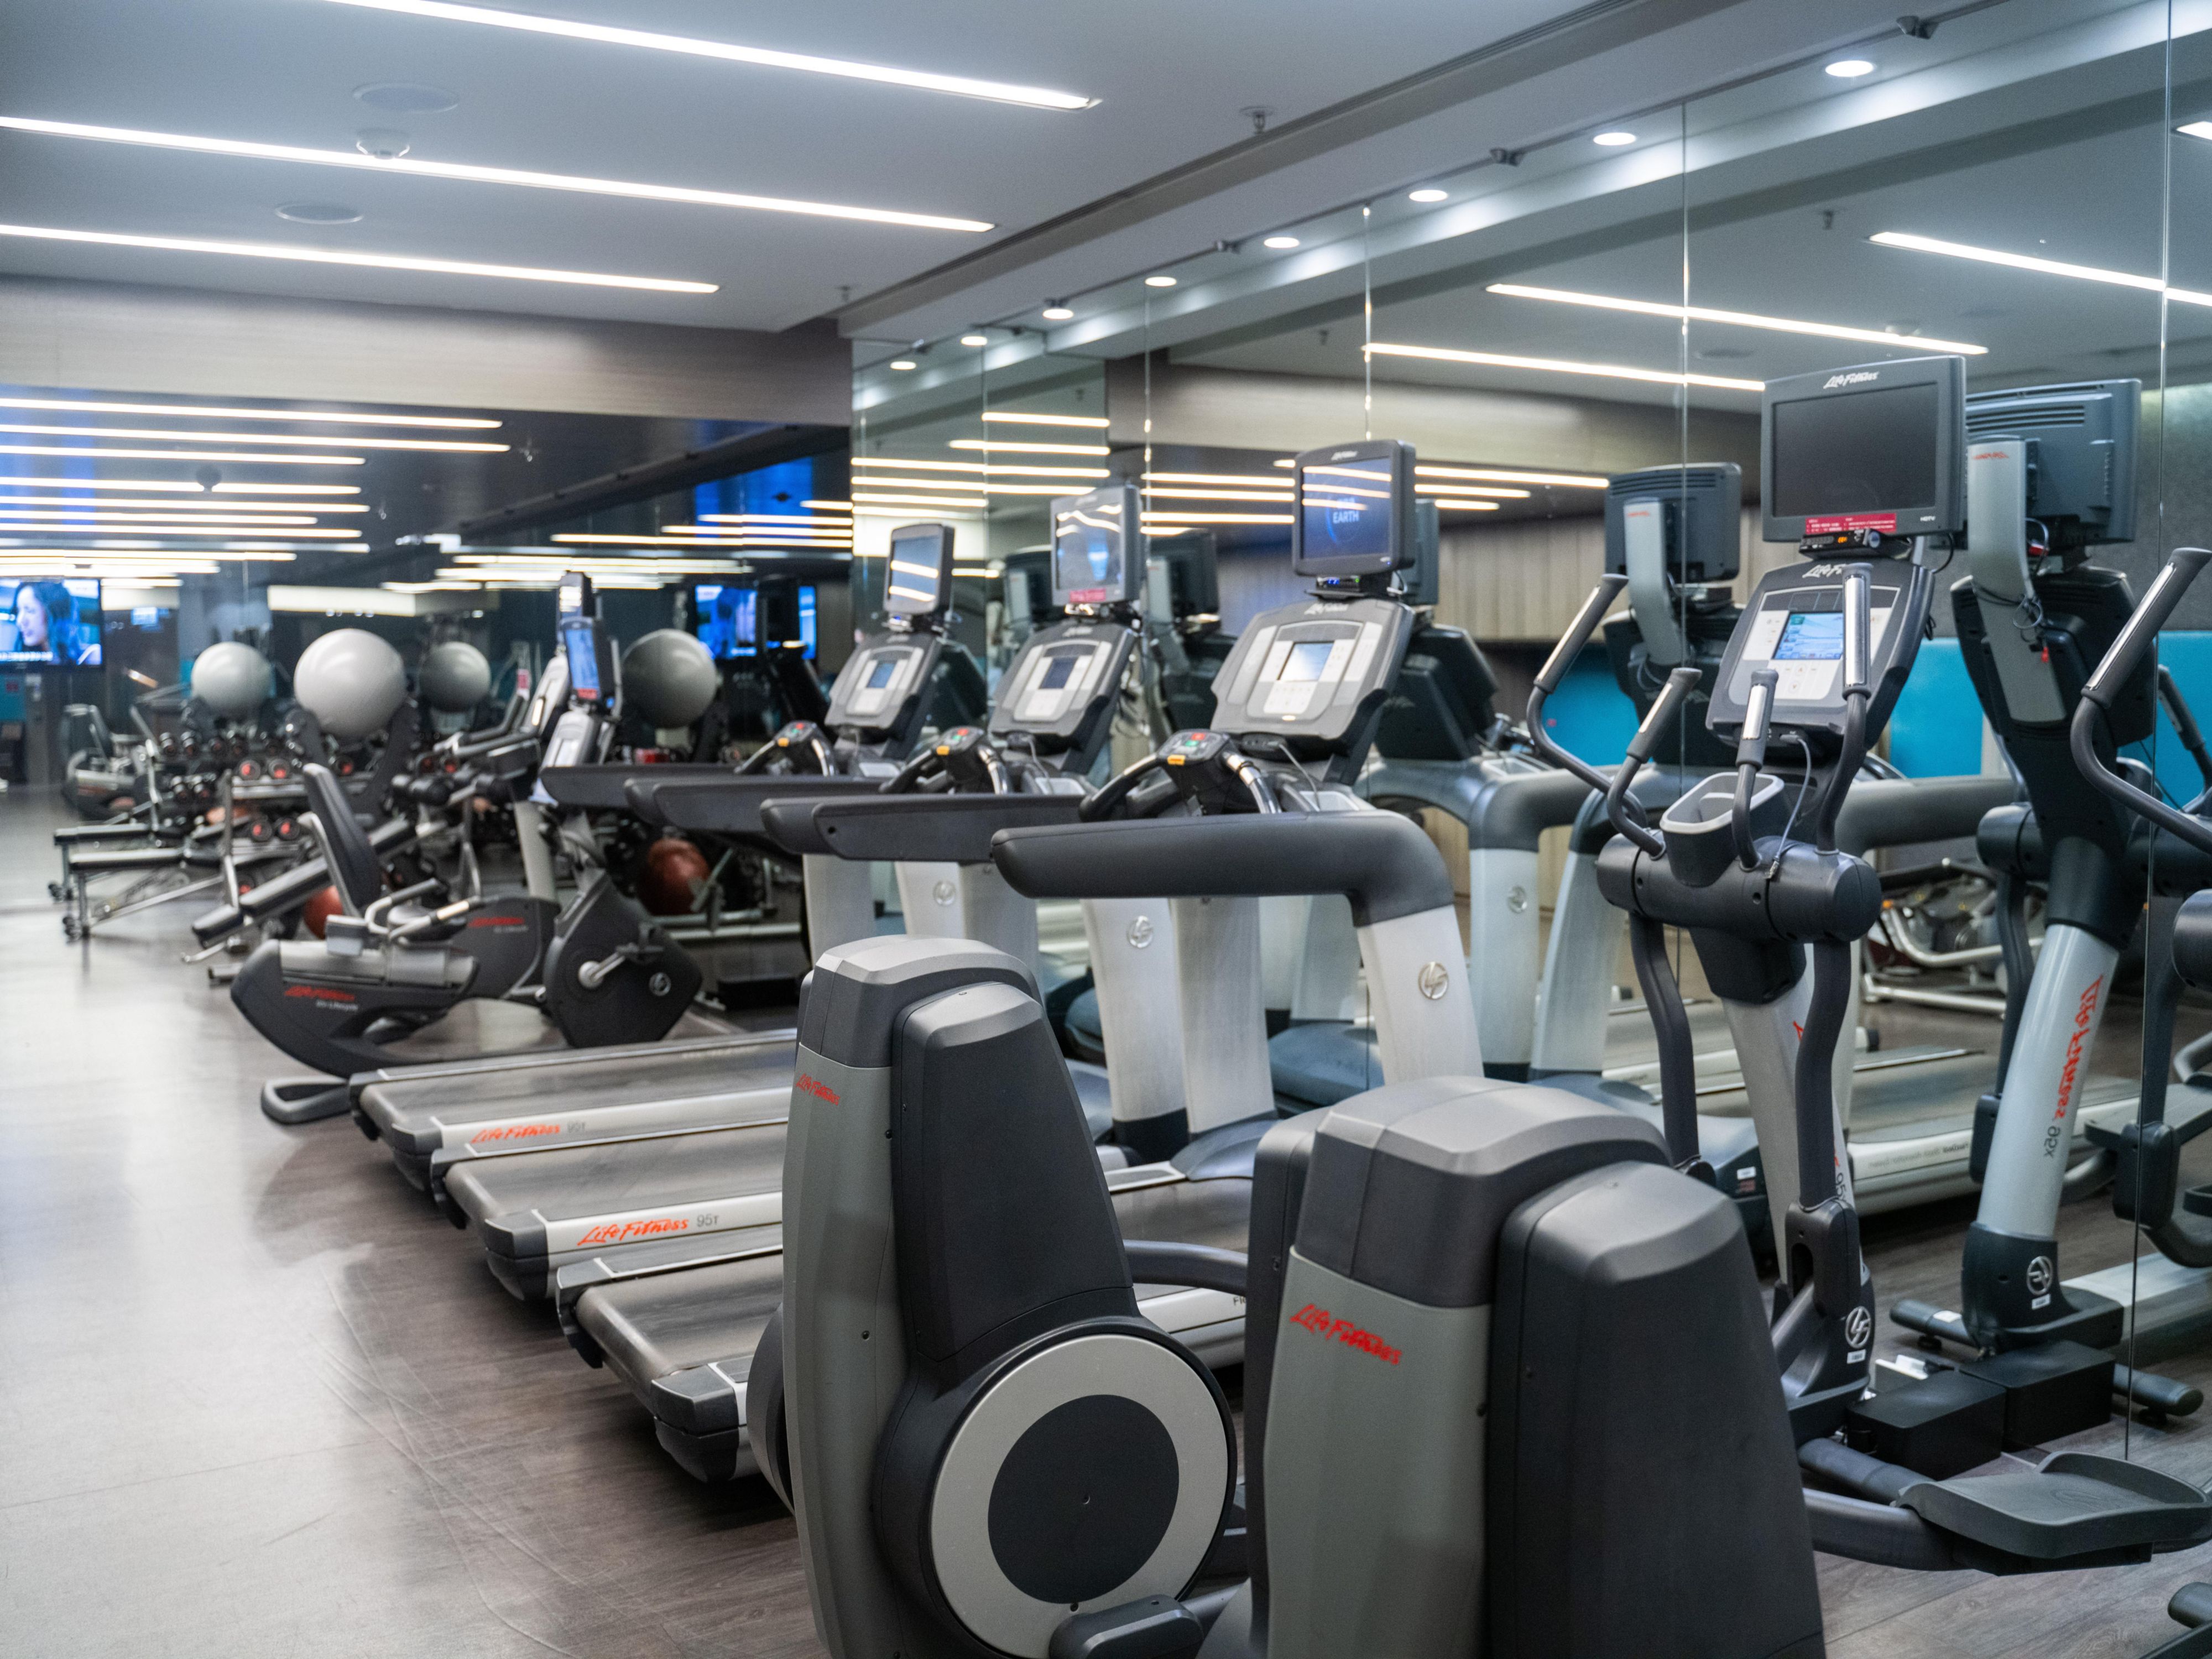 From 1 May 2024, Just $500 per month, you can embark on a fitness journey in our hotel gym. For only $600 per month, enjoy unlimited access to outdoor swimming pool. And for $900 per month, you'll have free access to both gym and outdoor swimming pool. For inquiries and more information, please contact us at 3983 0388 or email at health@cptko.com